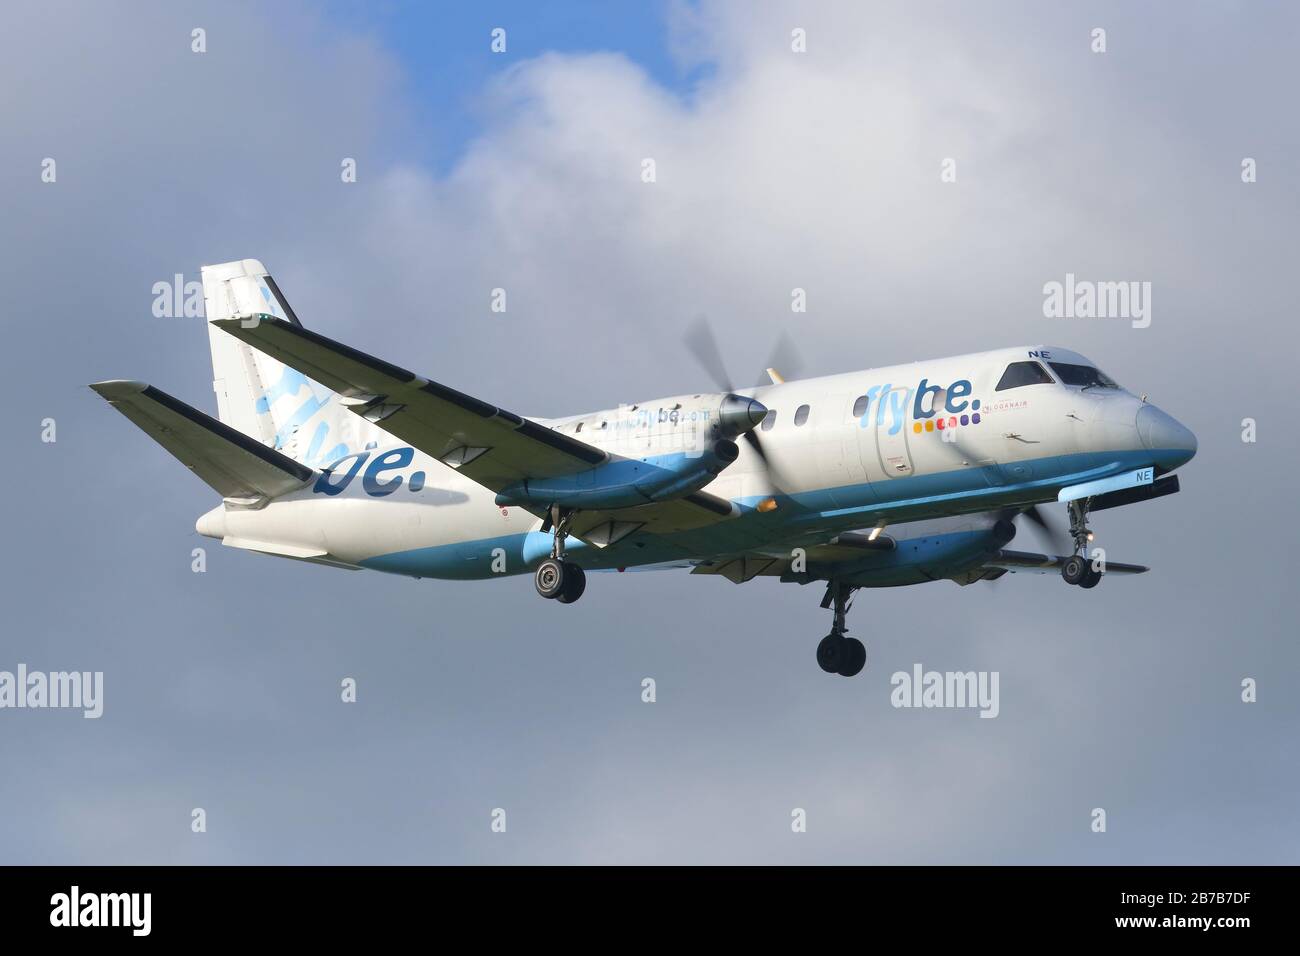 A Flybe aircraft making a landing at Leeds Bradford International Airport Stock Photo